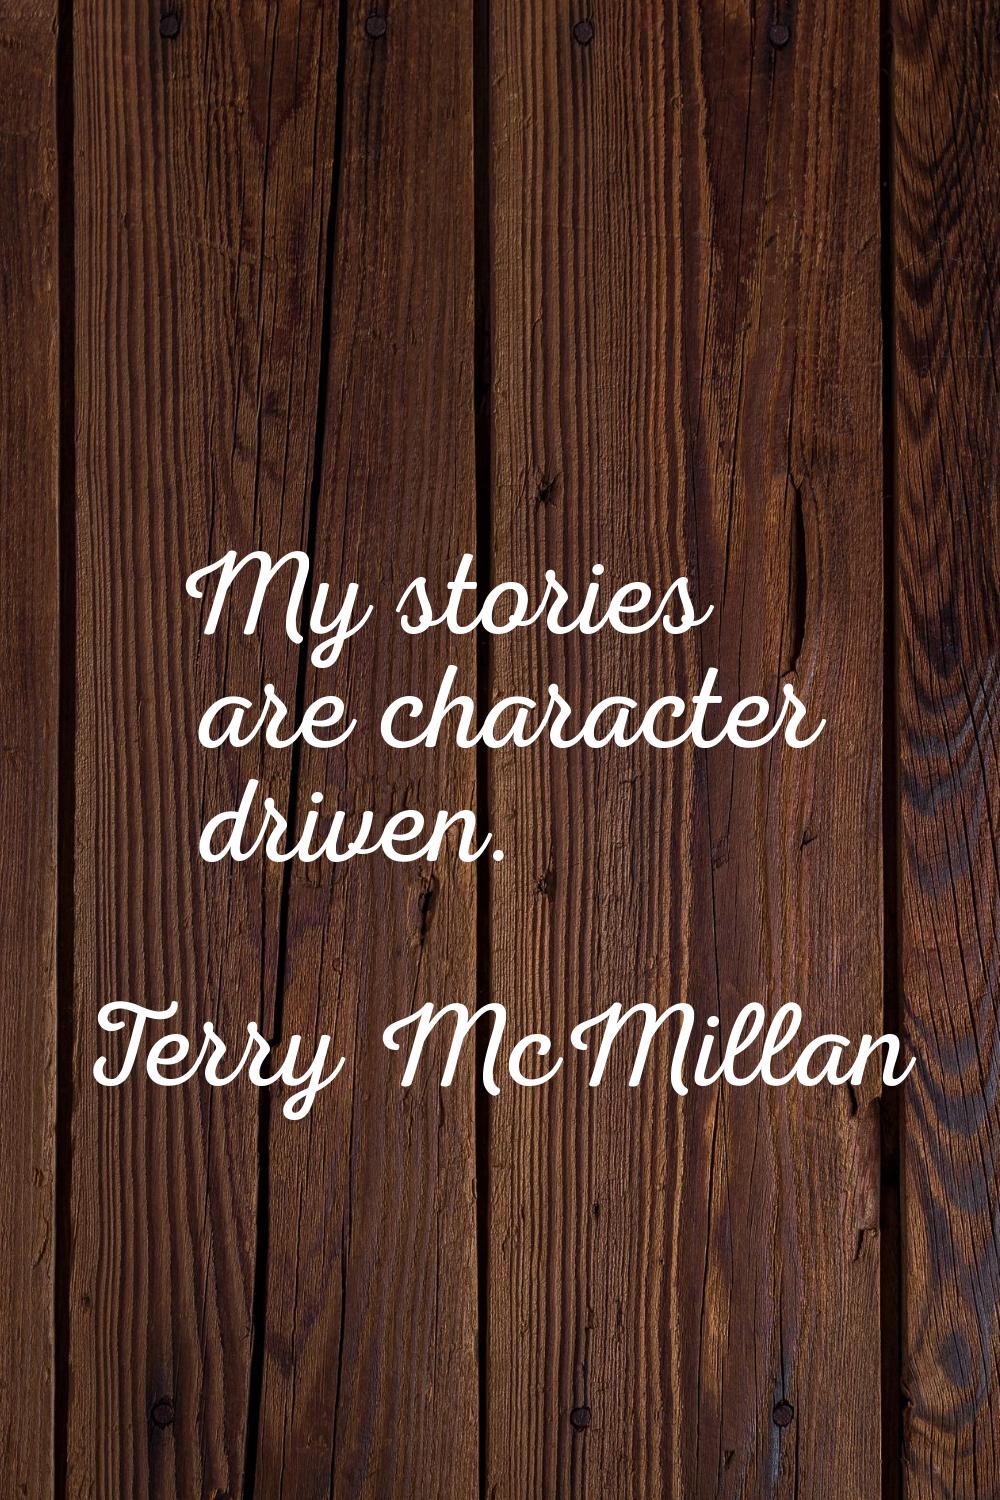 My stories are character driven.